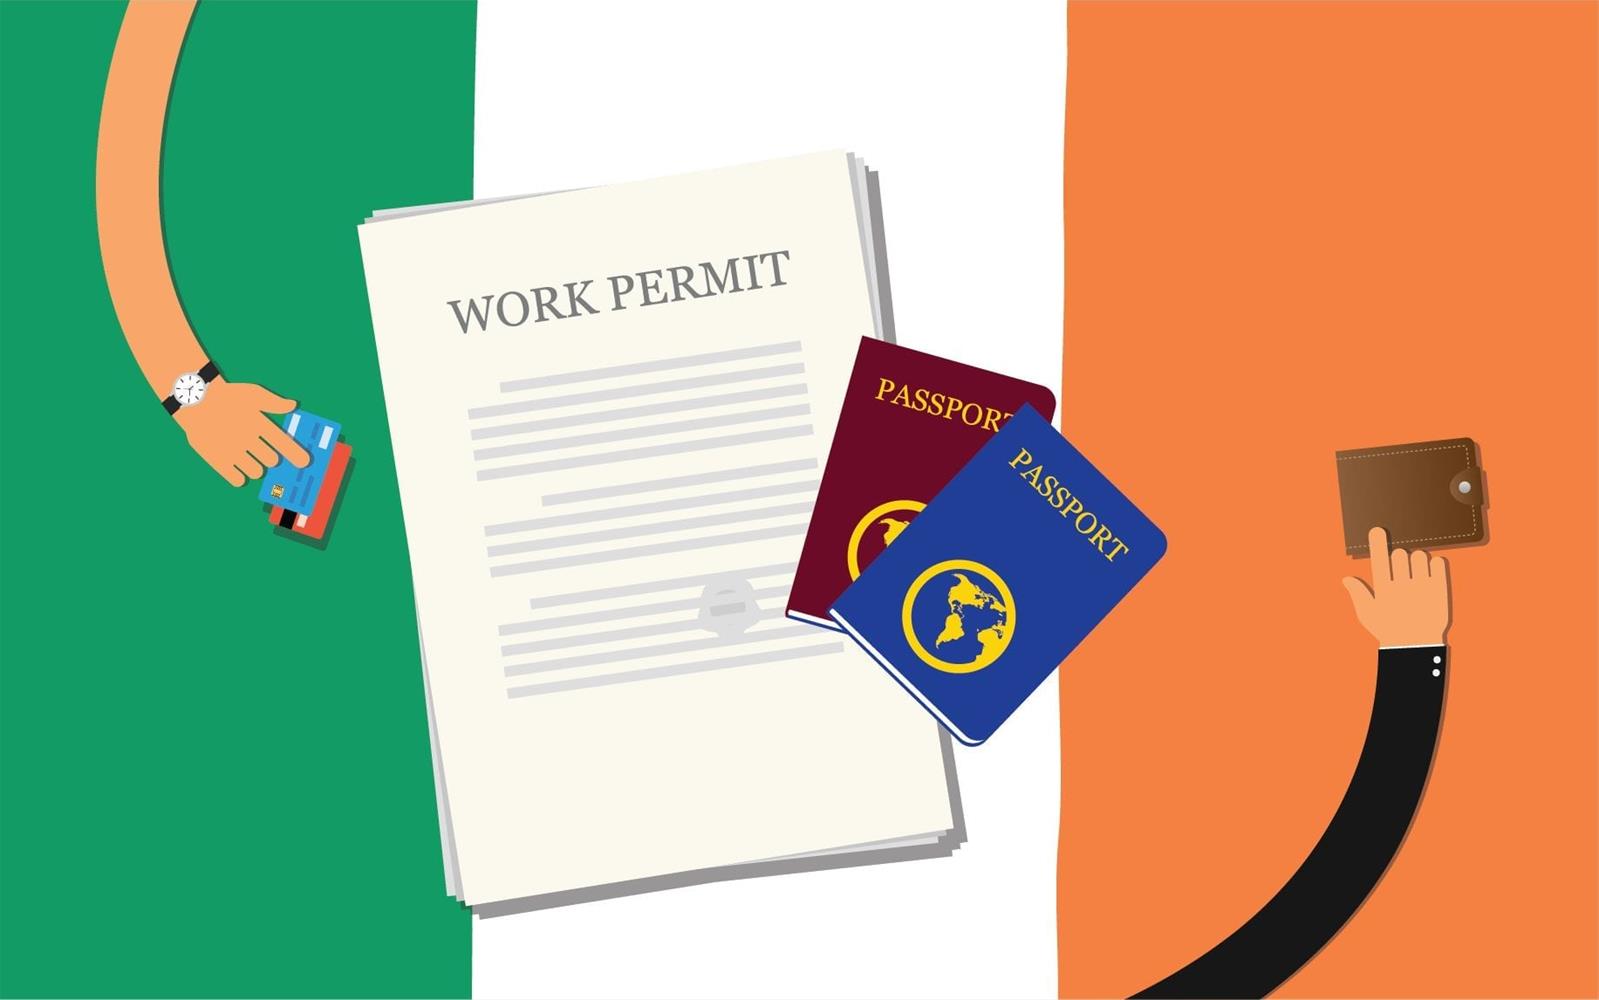 Who is exempt from work permits in Vietnam?